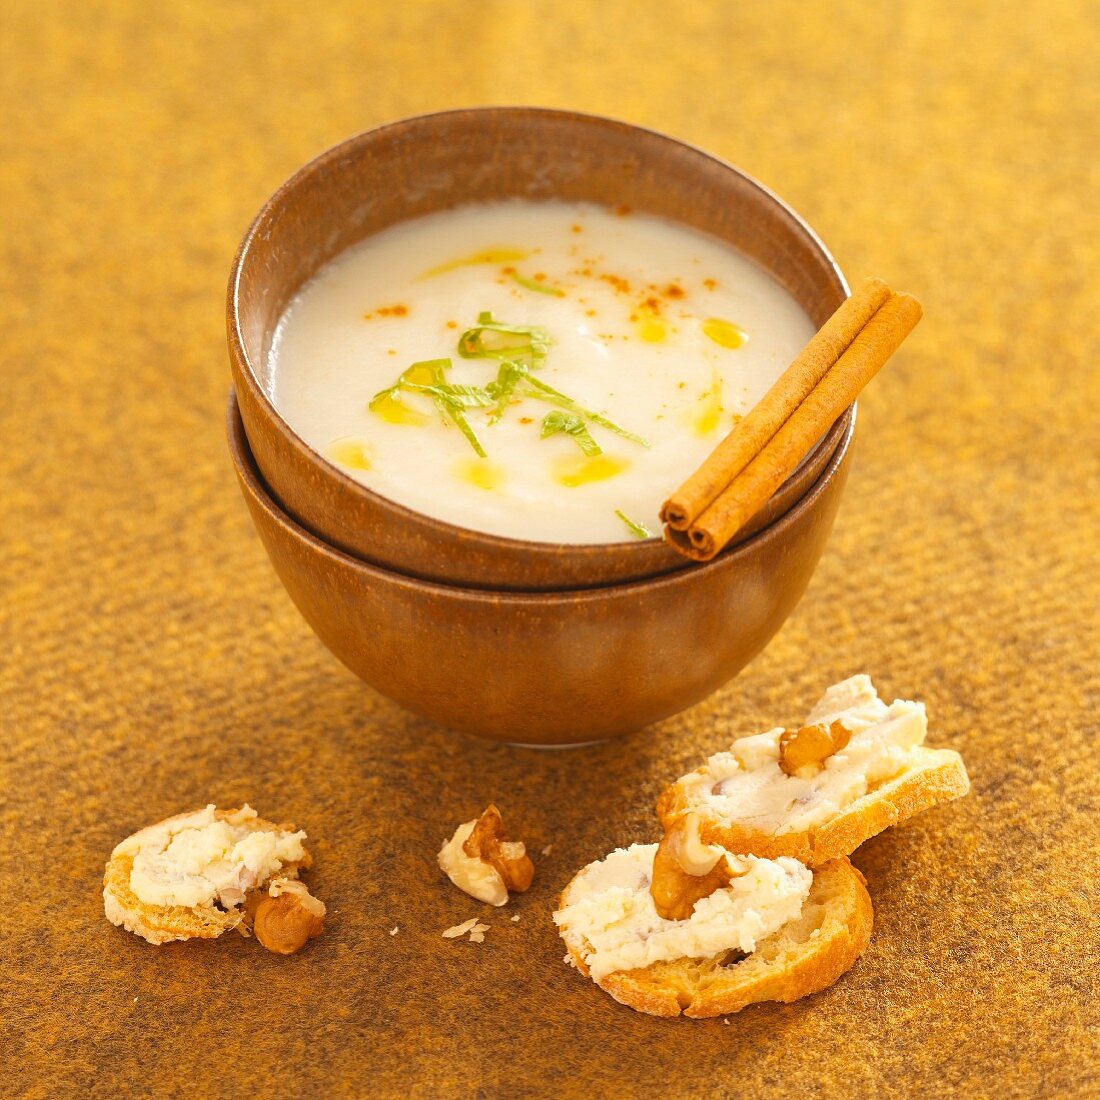 Cream of celeriac soup with croutons topped with cheese and walnuts